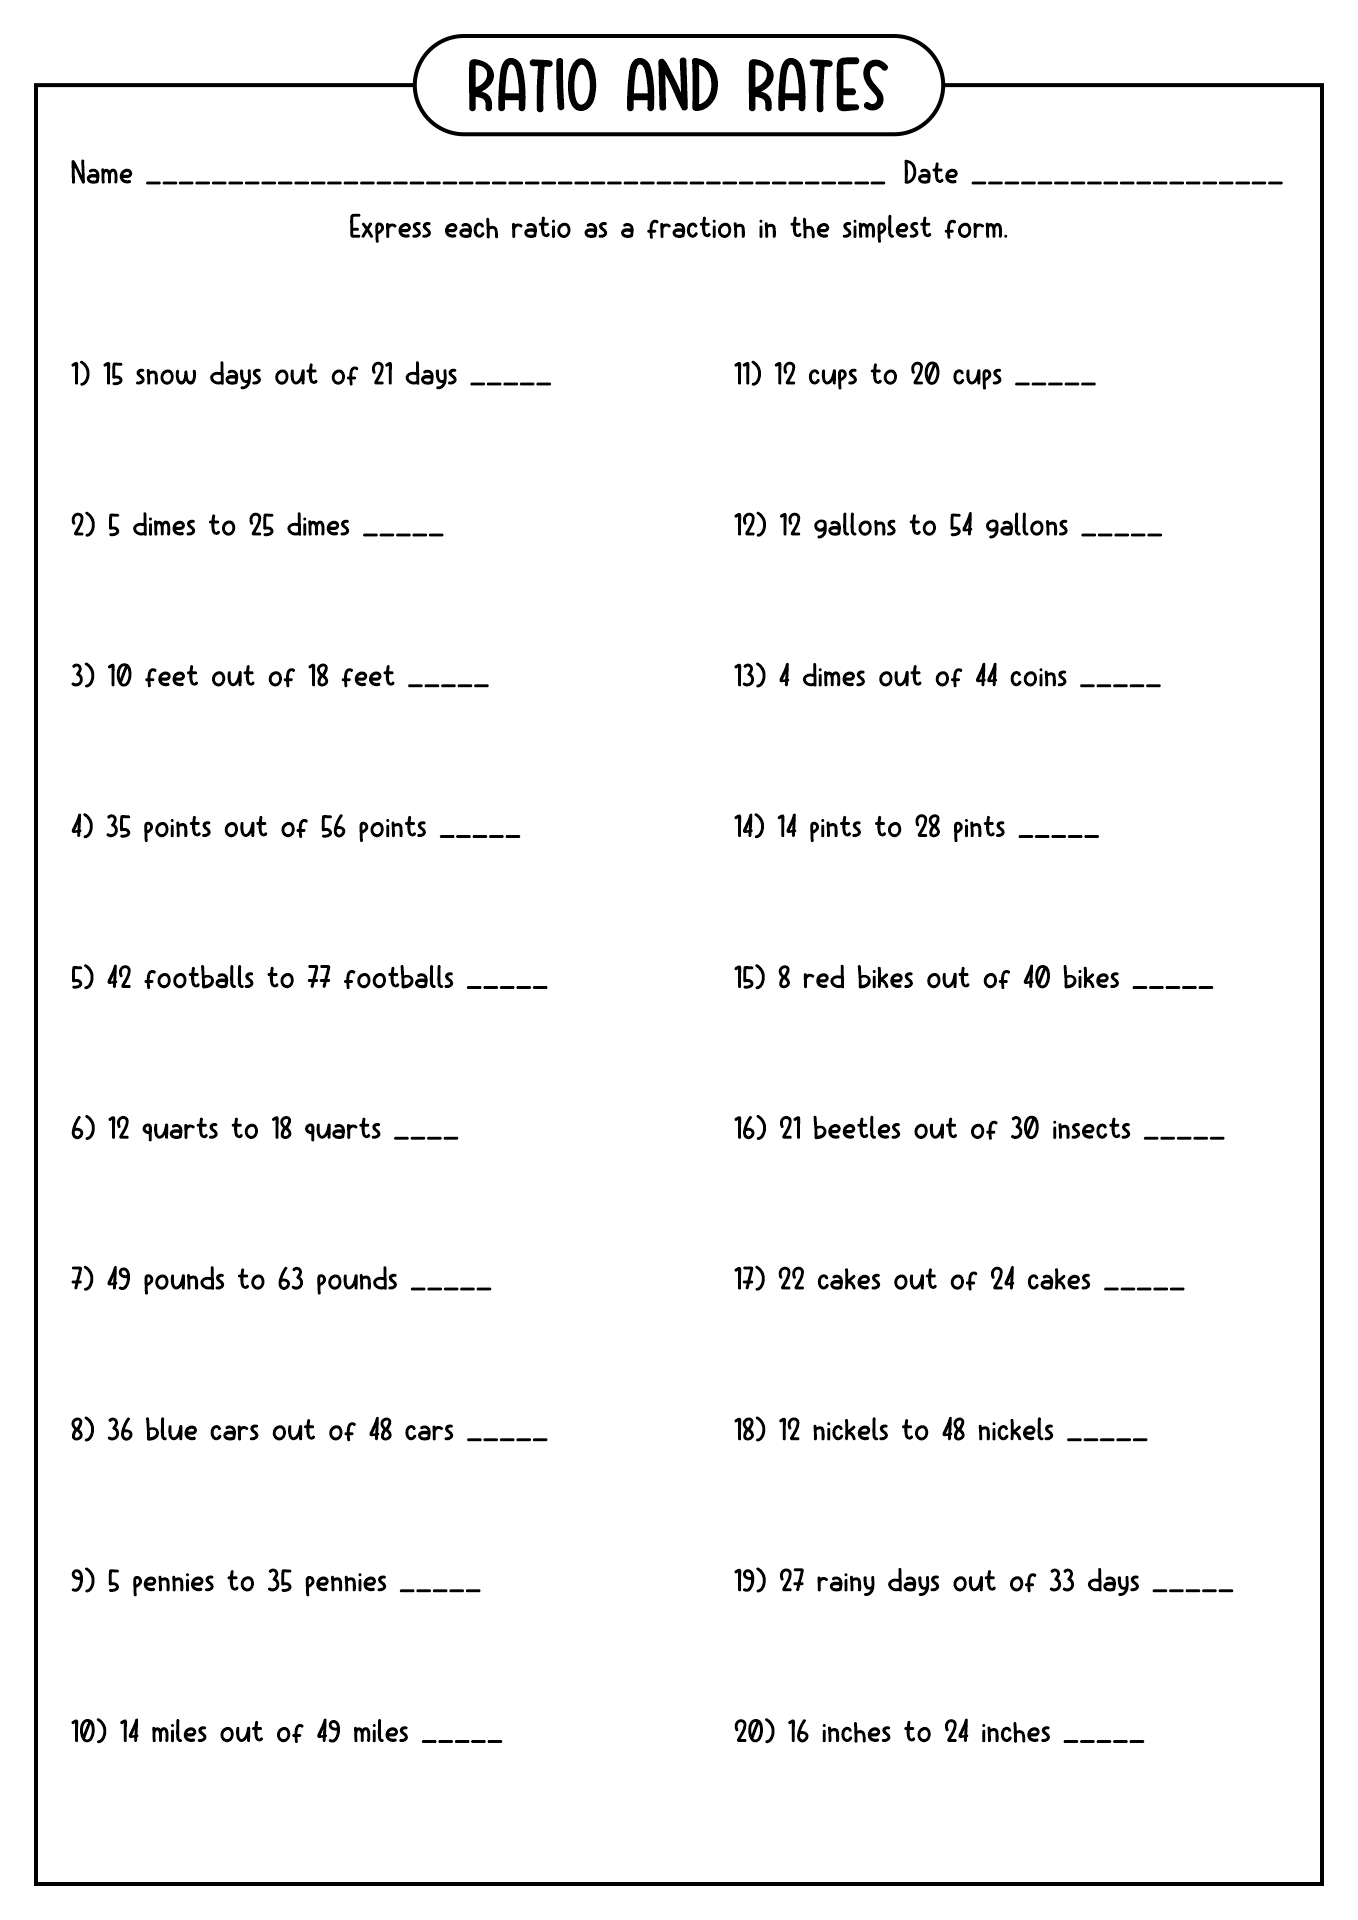 6th-grade-math-ratios-worksheets-in-2021-proportions-worksheet-ratio